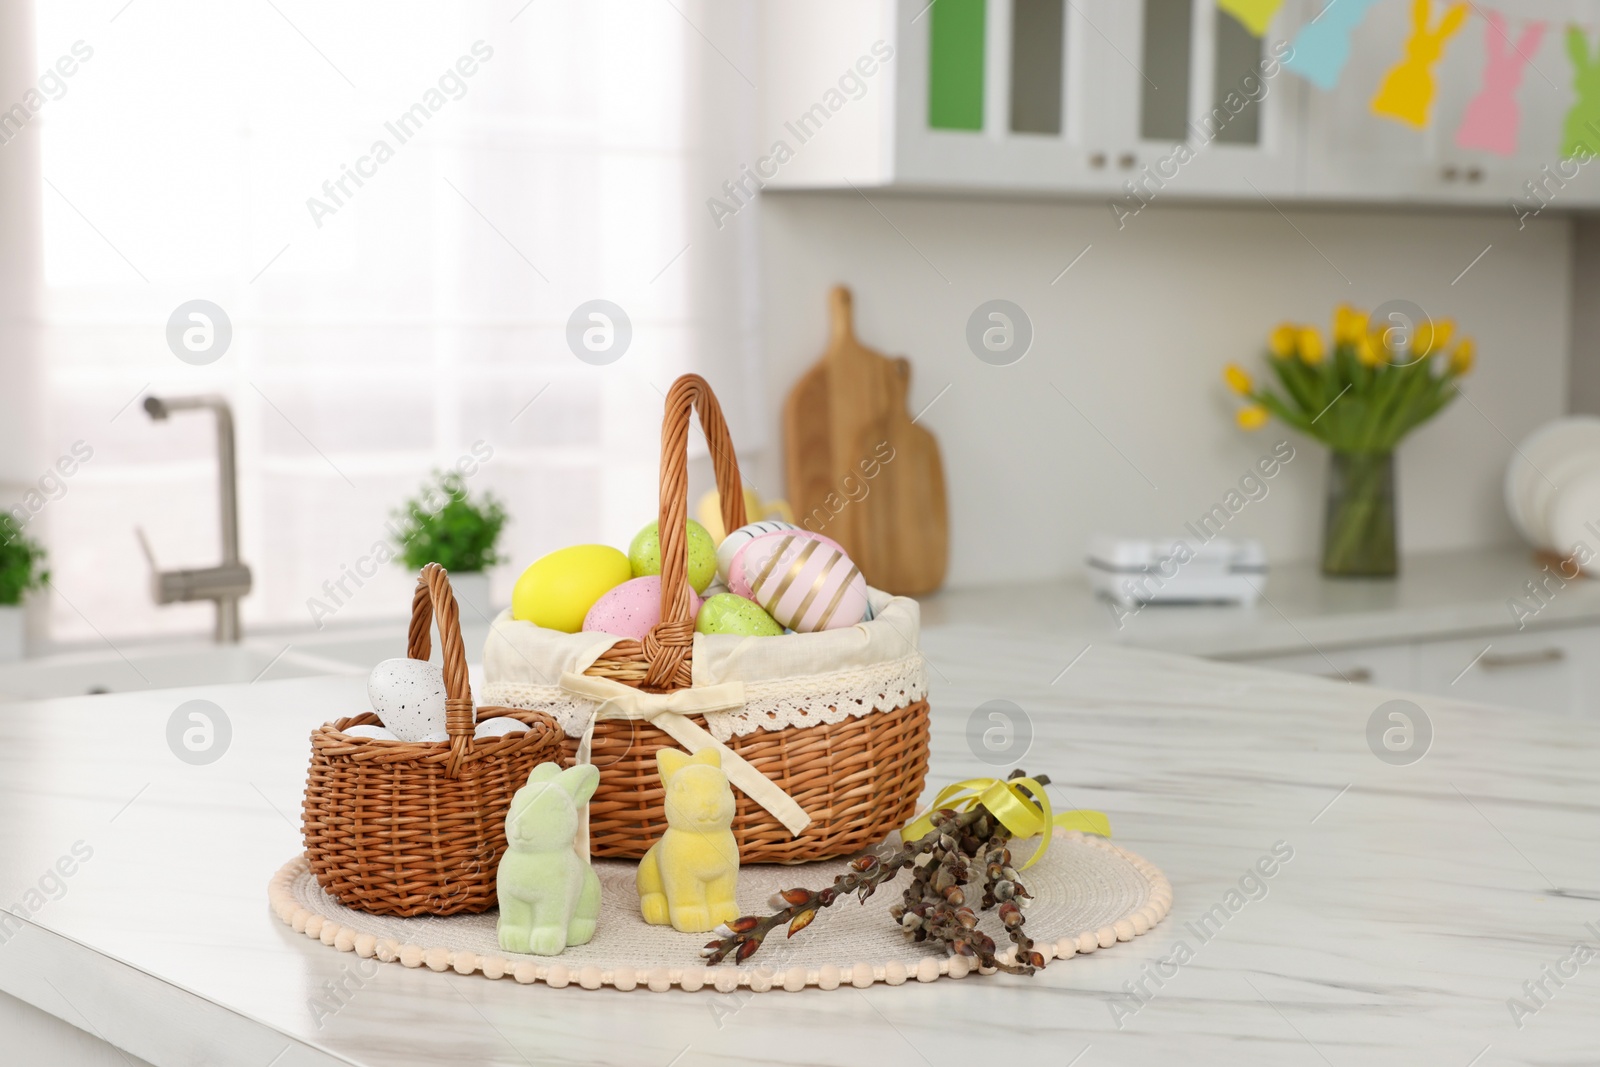 Photo of Wicker baskets with Easter eggs and willow twigs at white marble table in kitchen